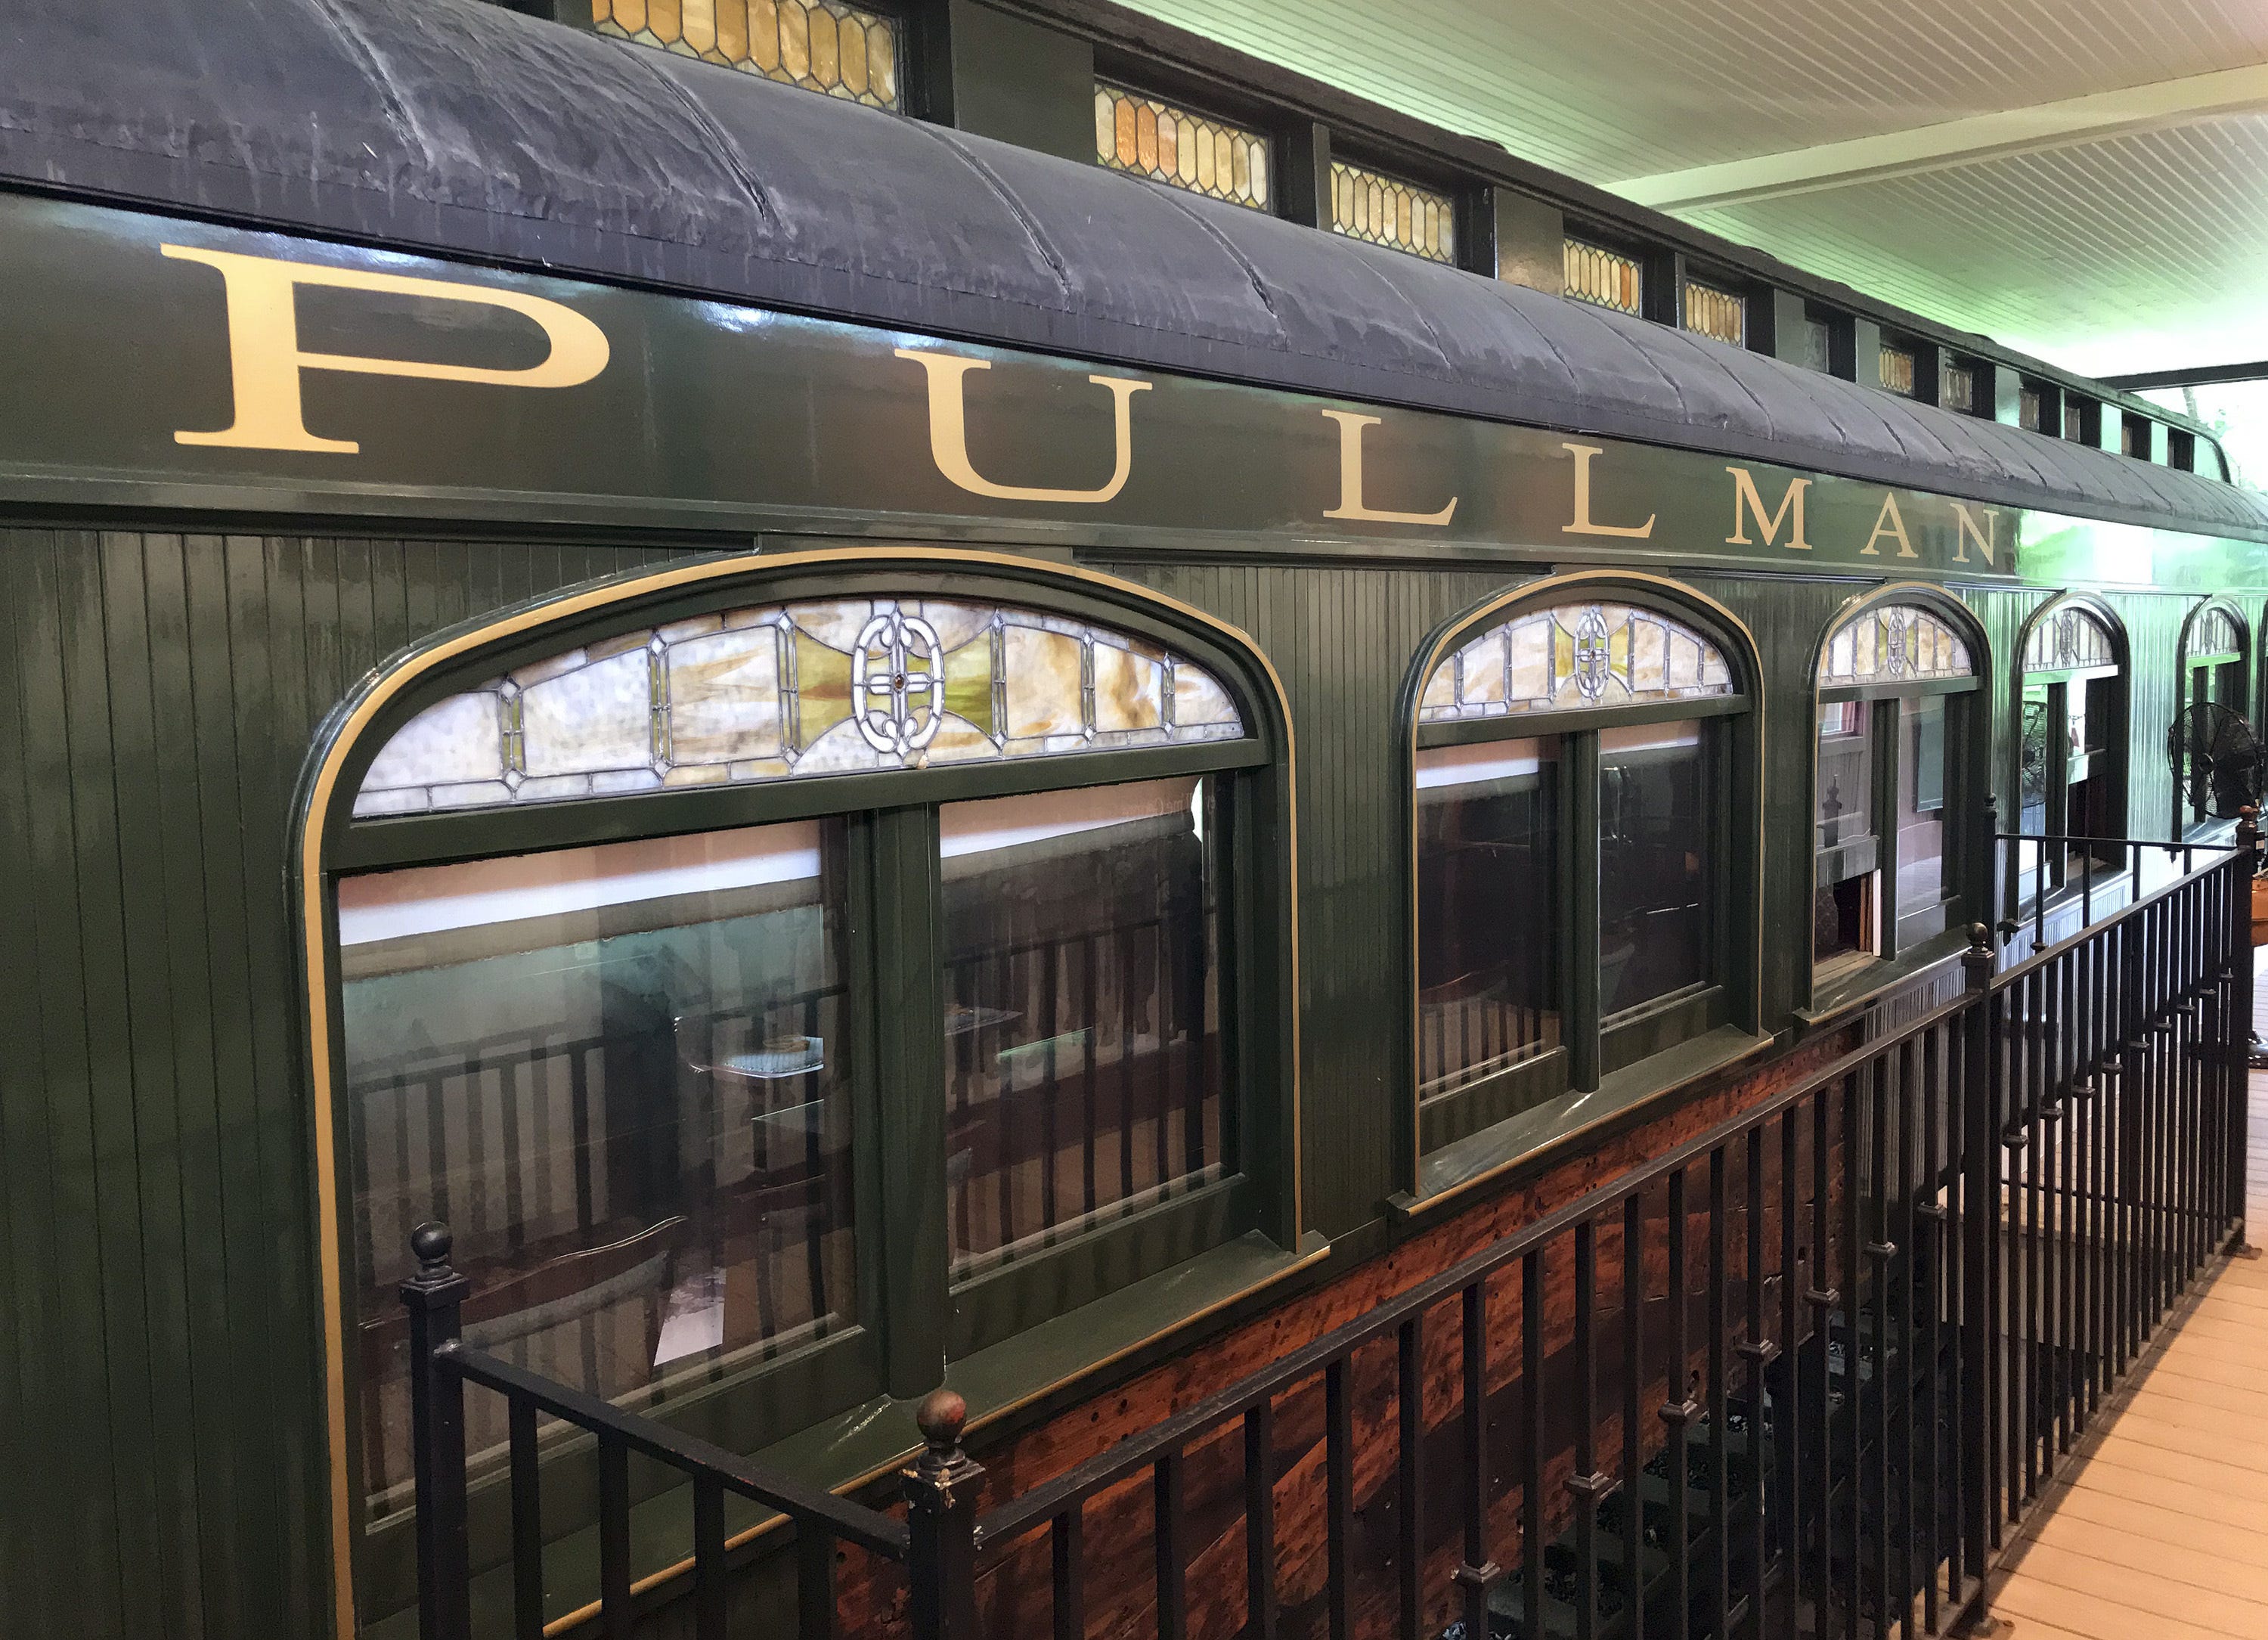 A Pullman Palace Car is on display at Hildene, the summer home of Robert Todd Lincoln, son of President Abraham Lincoln, in Manchester, Vermont. Robert Todd was serving as president of the Pullman company at the time he built the home. David Jordan/AP